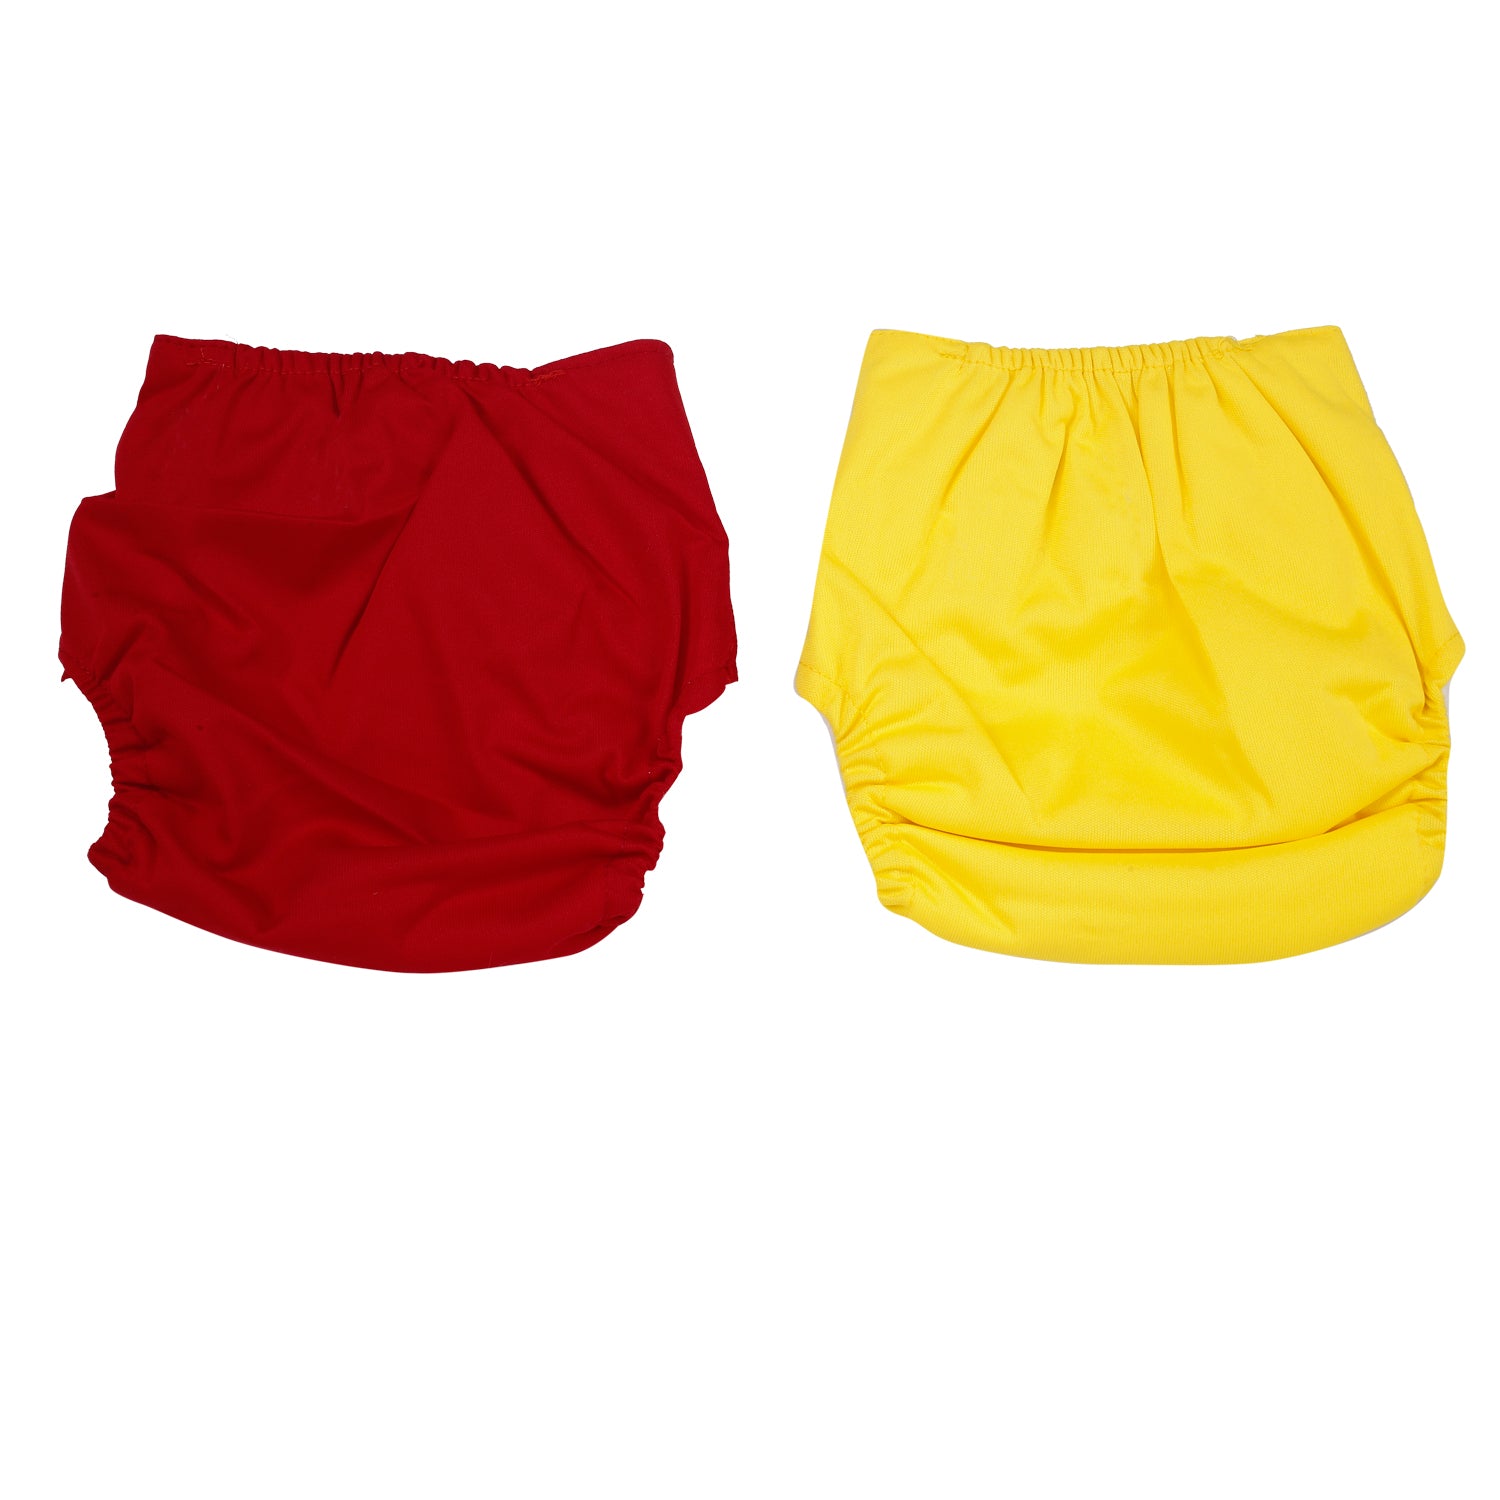 Plain Red And Yellow Reusable 2 Pk Diaper - Baby Moo